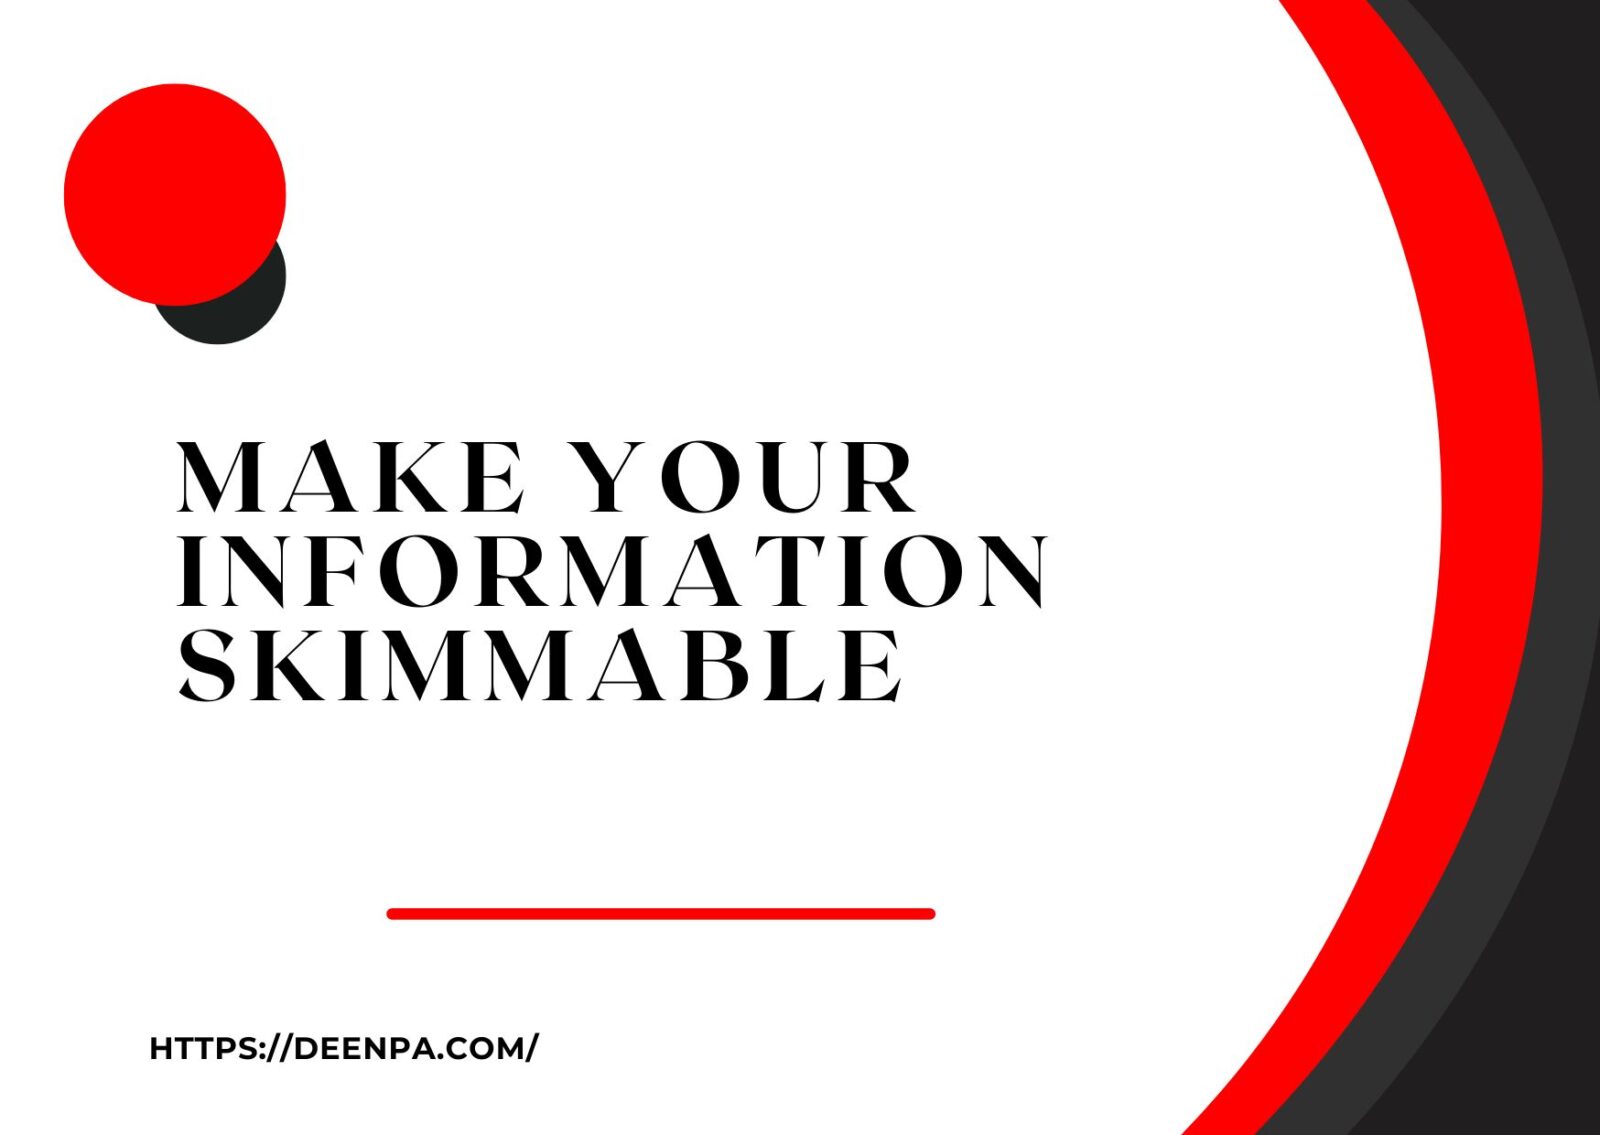 Make Your Information Skimmable